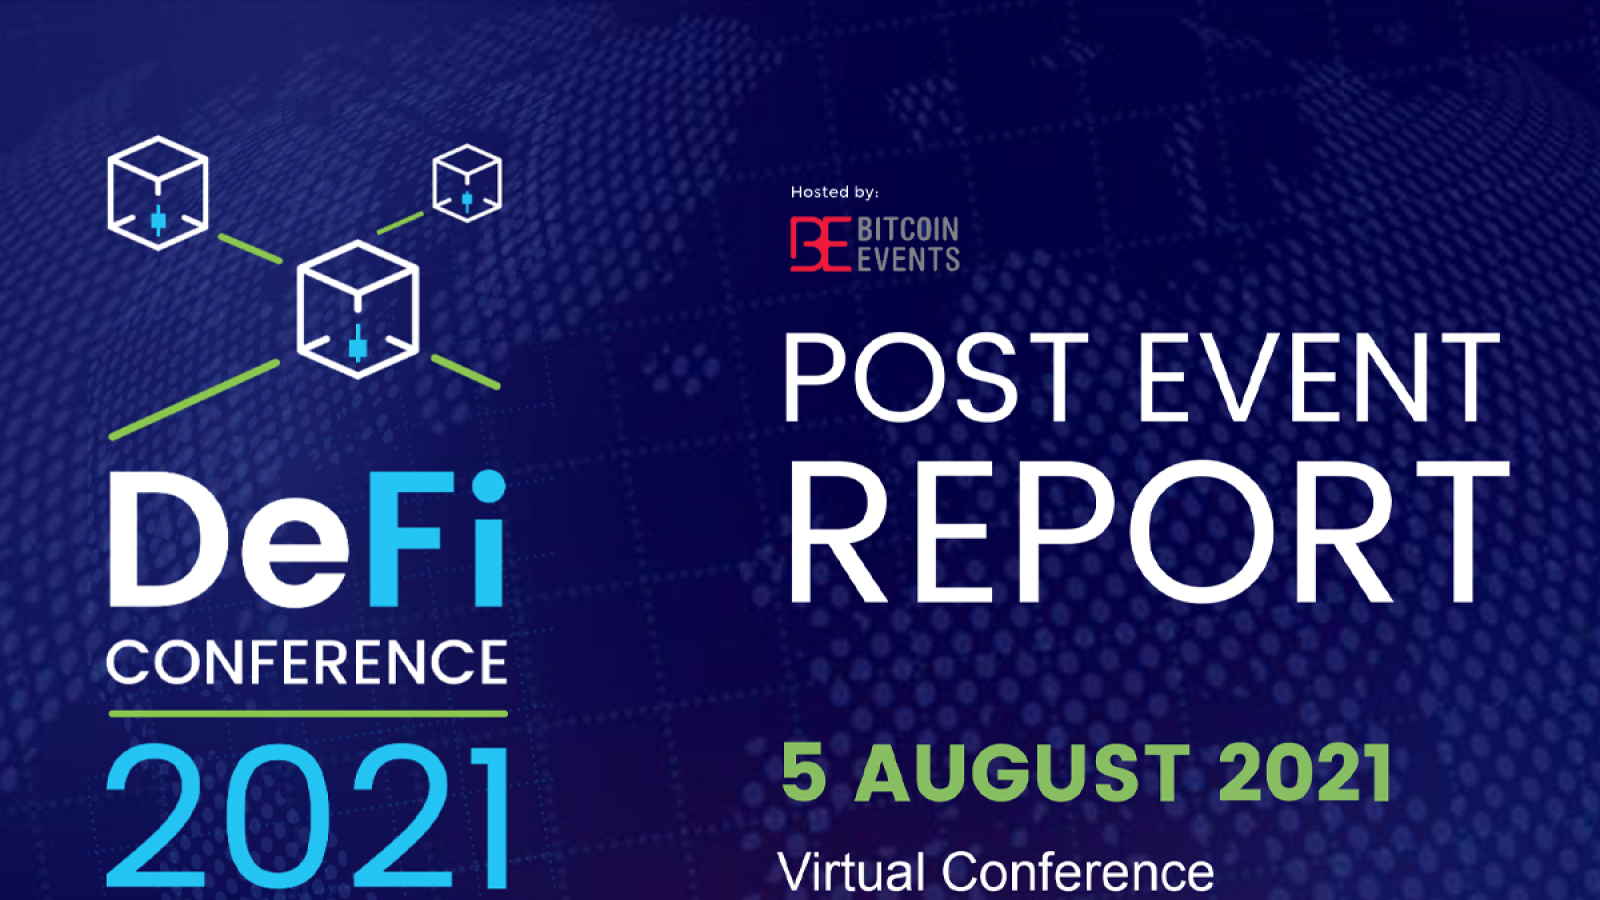 DeFi Conference 2021 Post Event Report